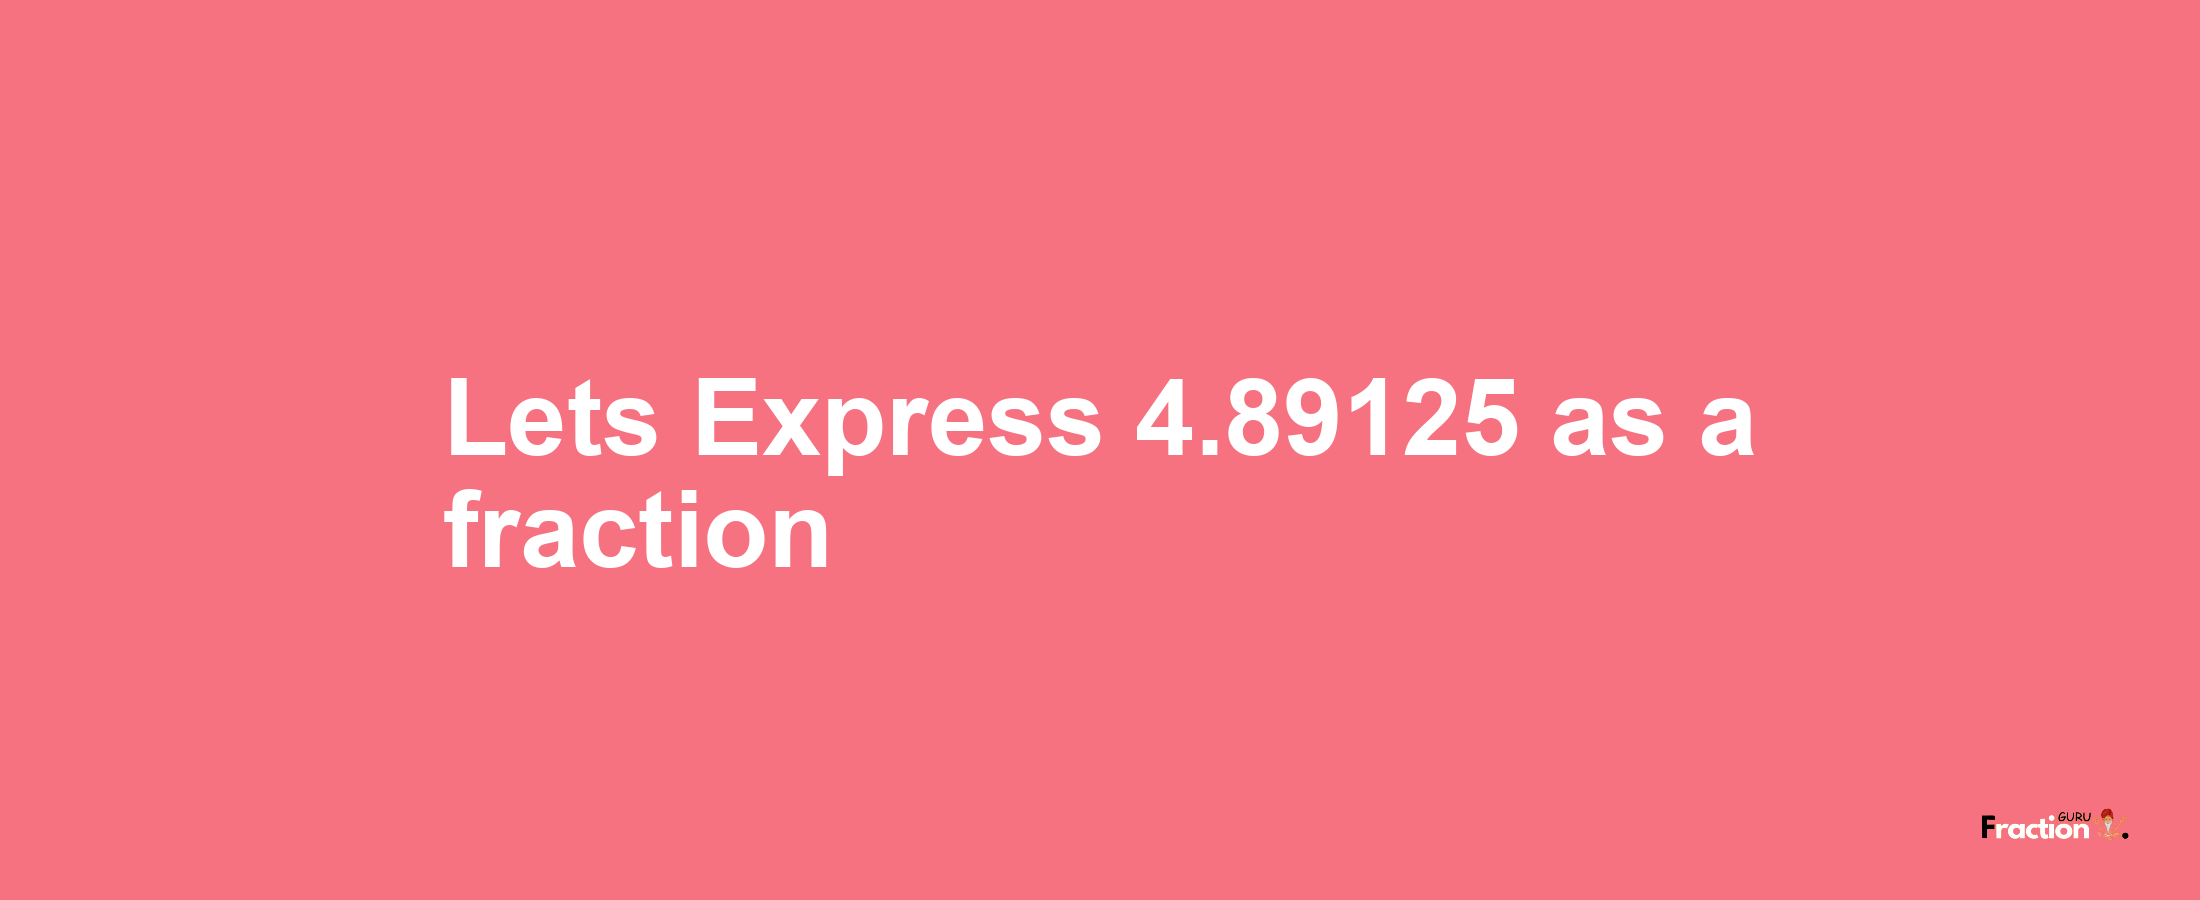 Lets Express 4.89125 as afraction